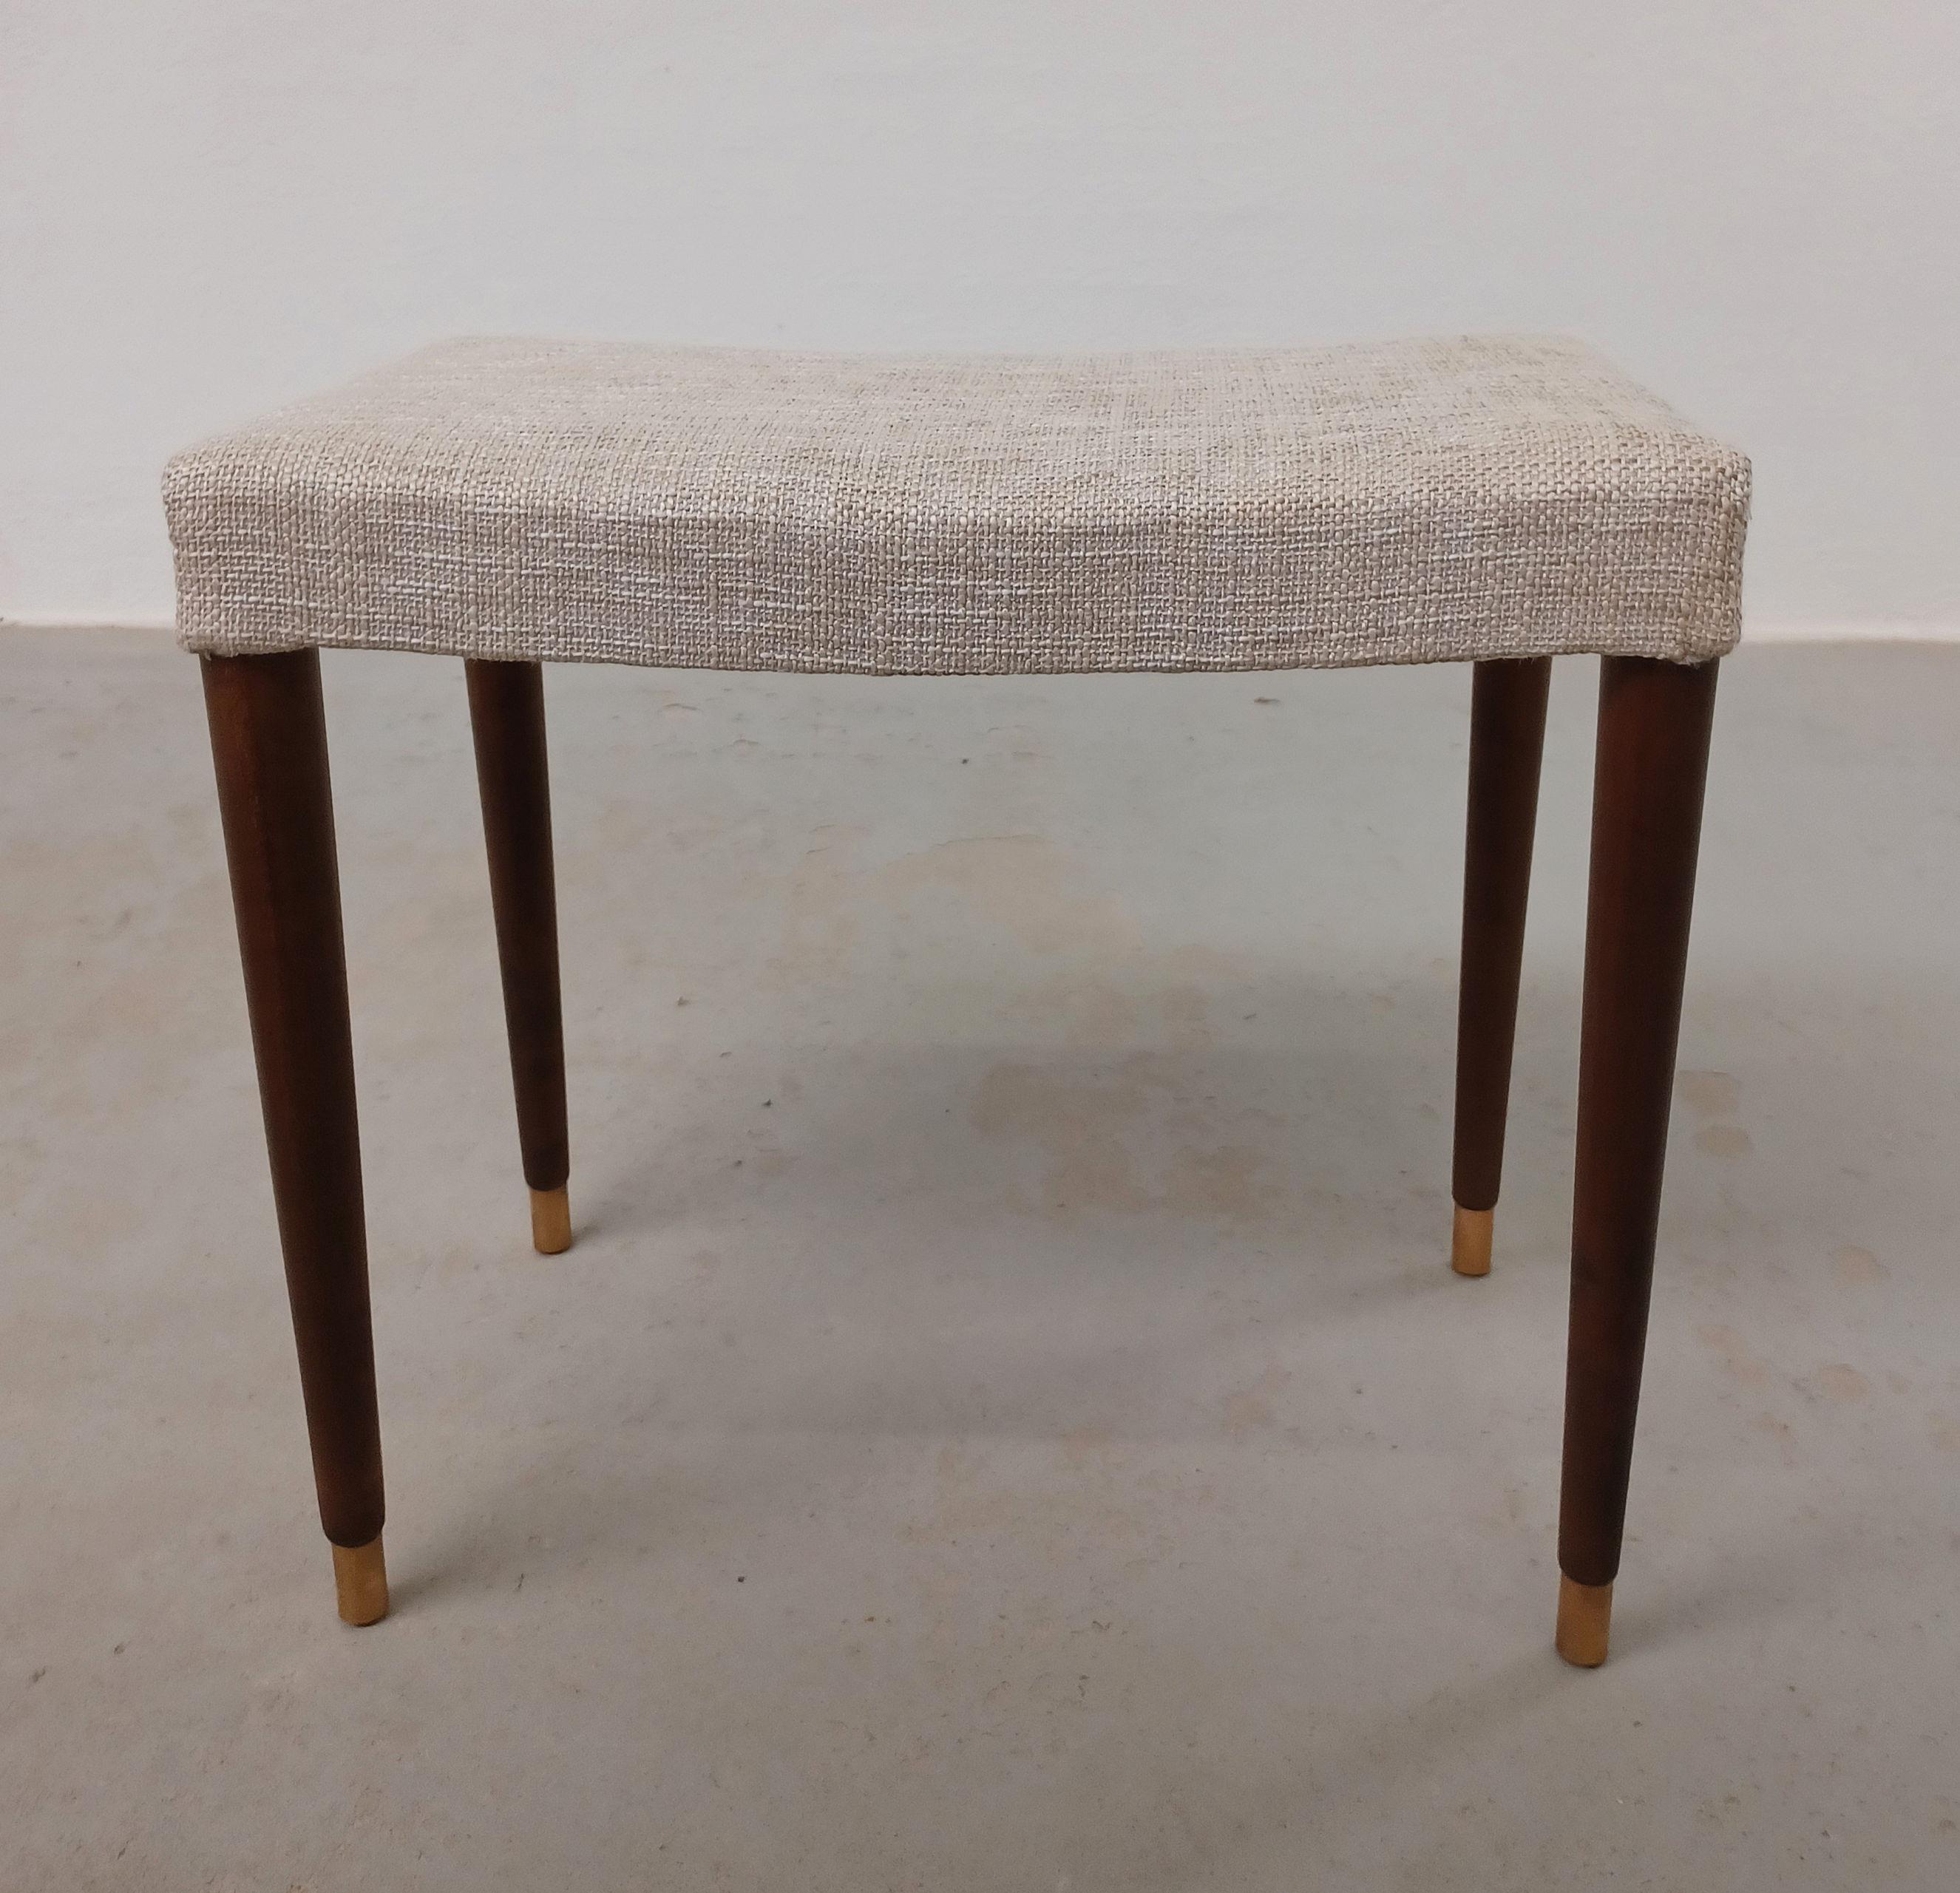 Beech 1950's Set of Two Restored an Reupholstered Danish Mid-Century Modern stools For Sale